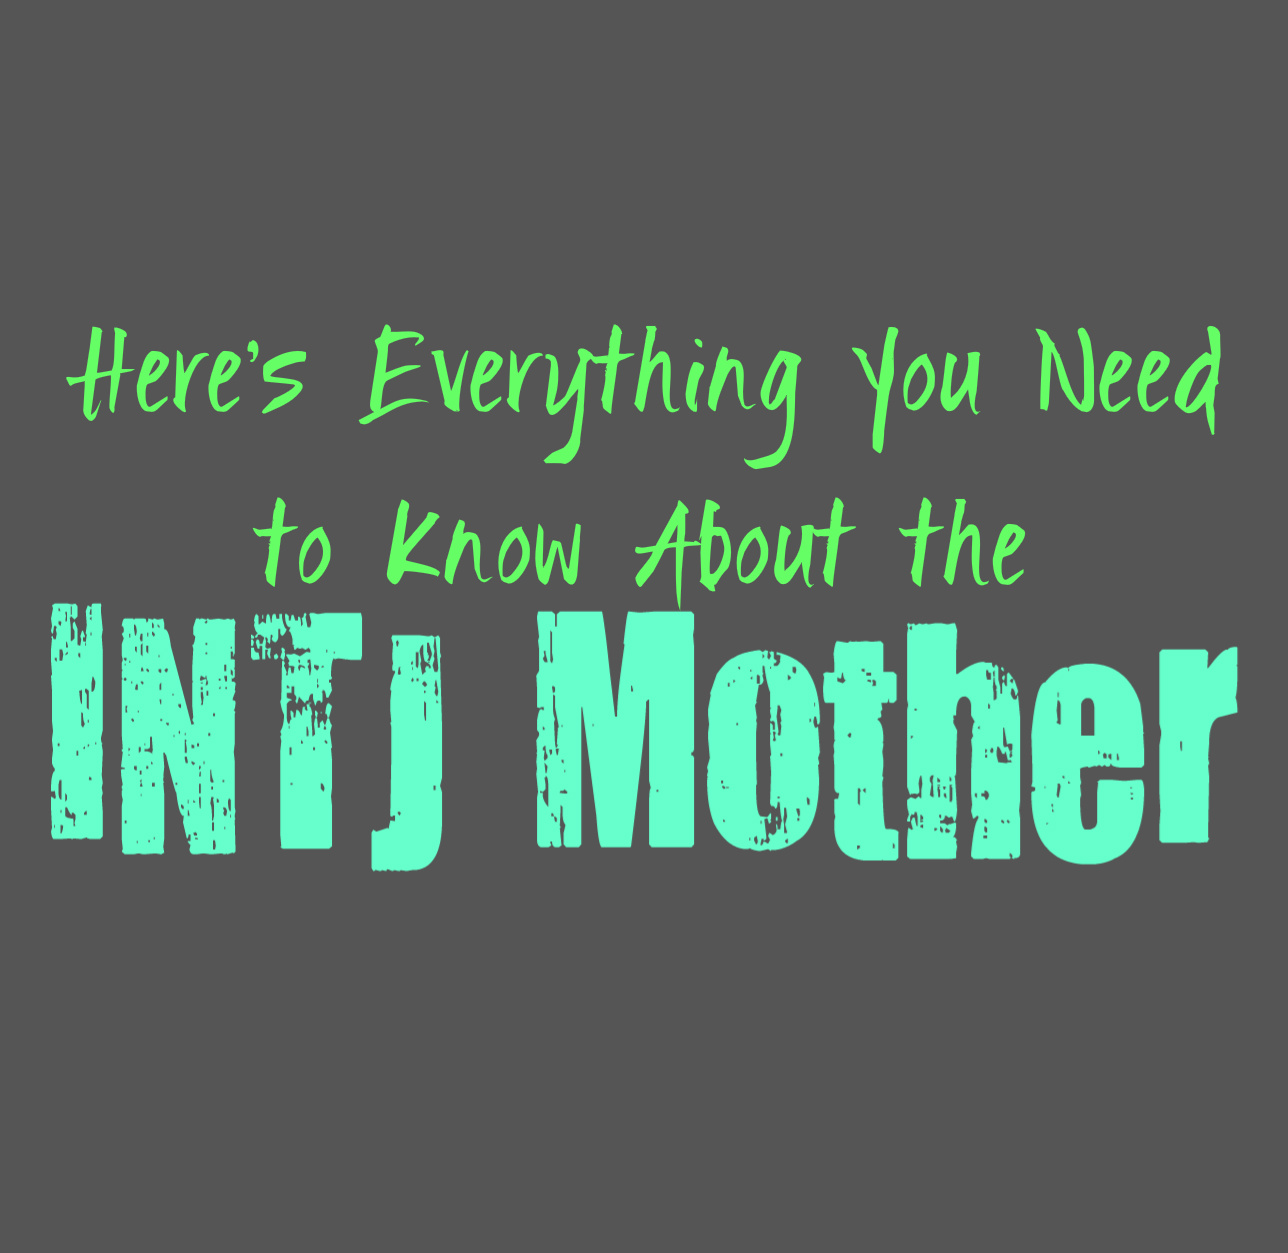 intj characters!, #intj #mothermother #10thingsihateaboutyou #katstr, intj meaning each letter